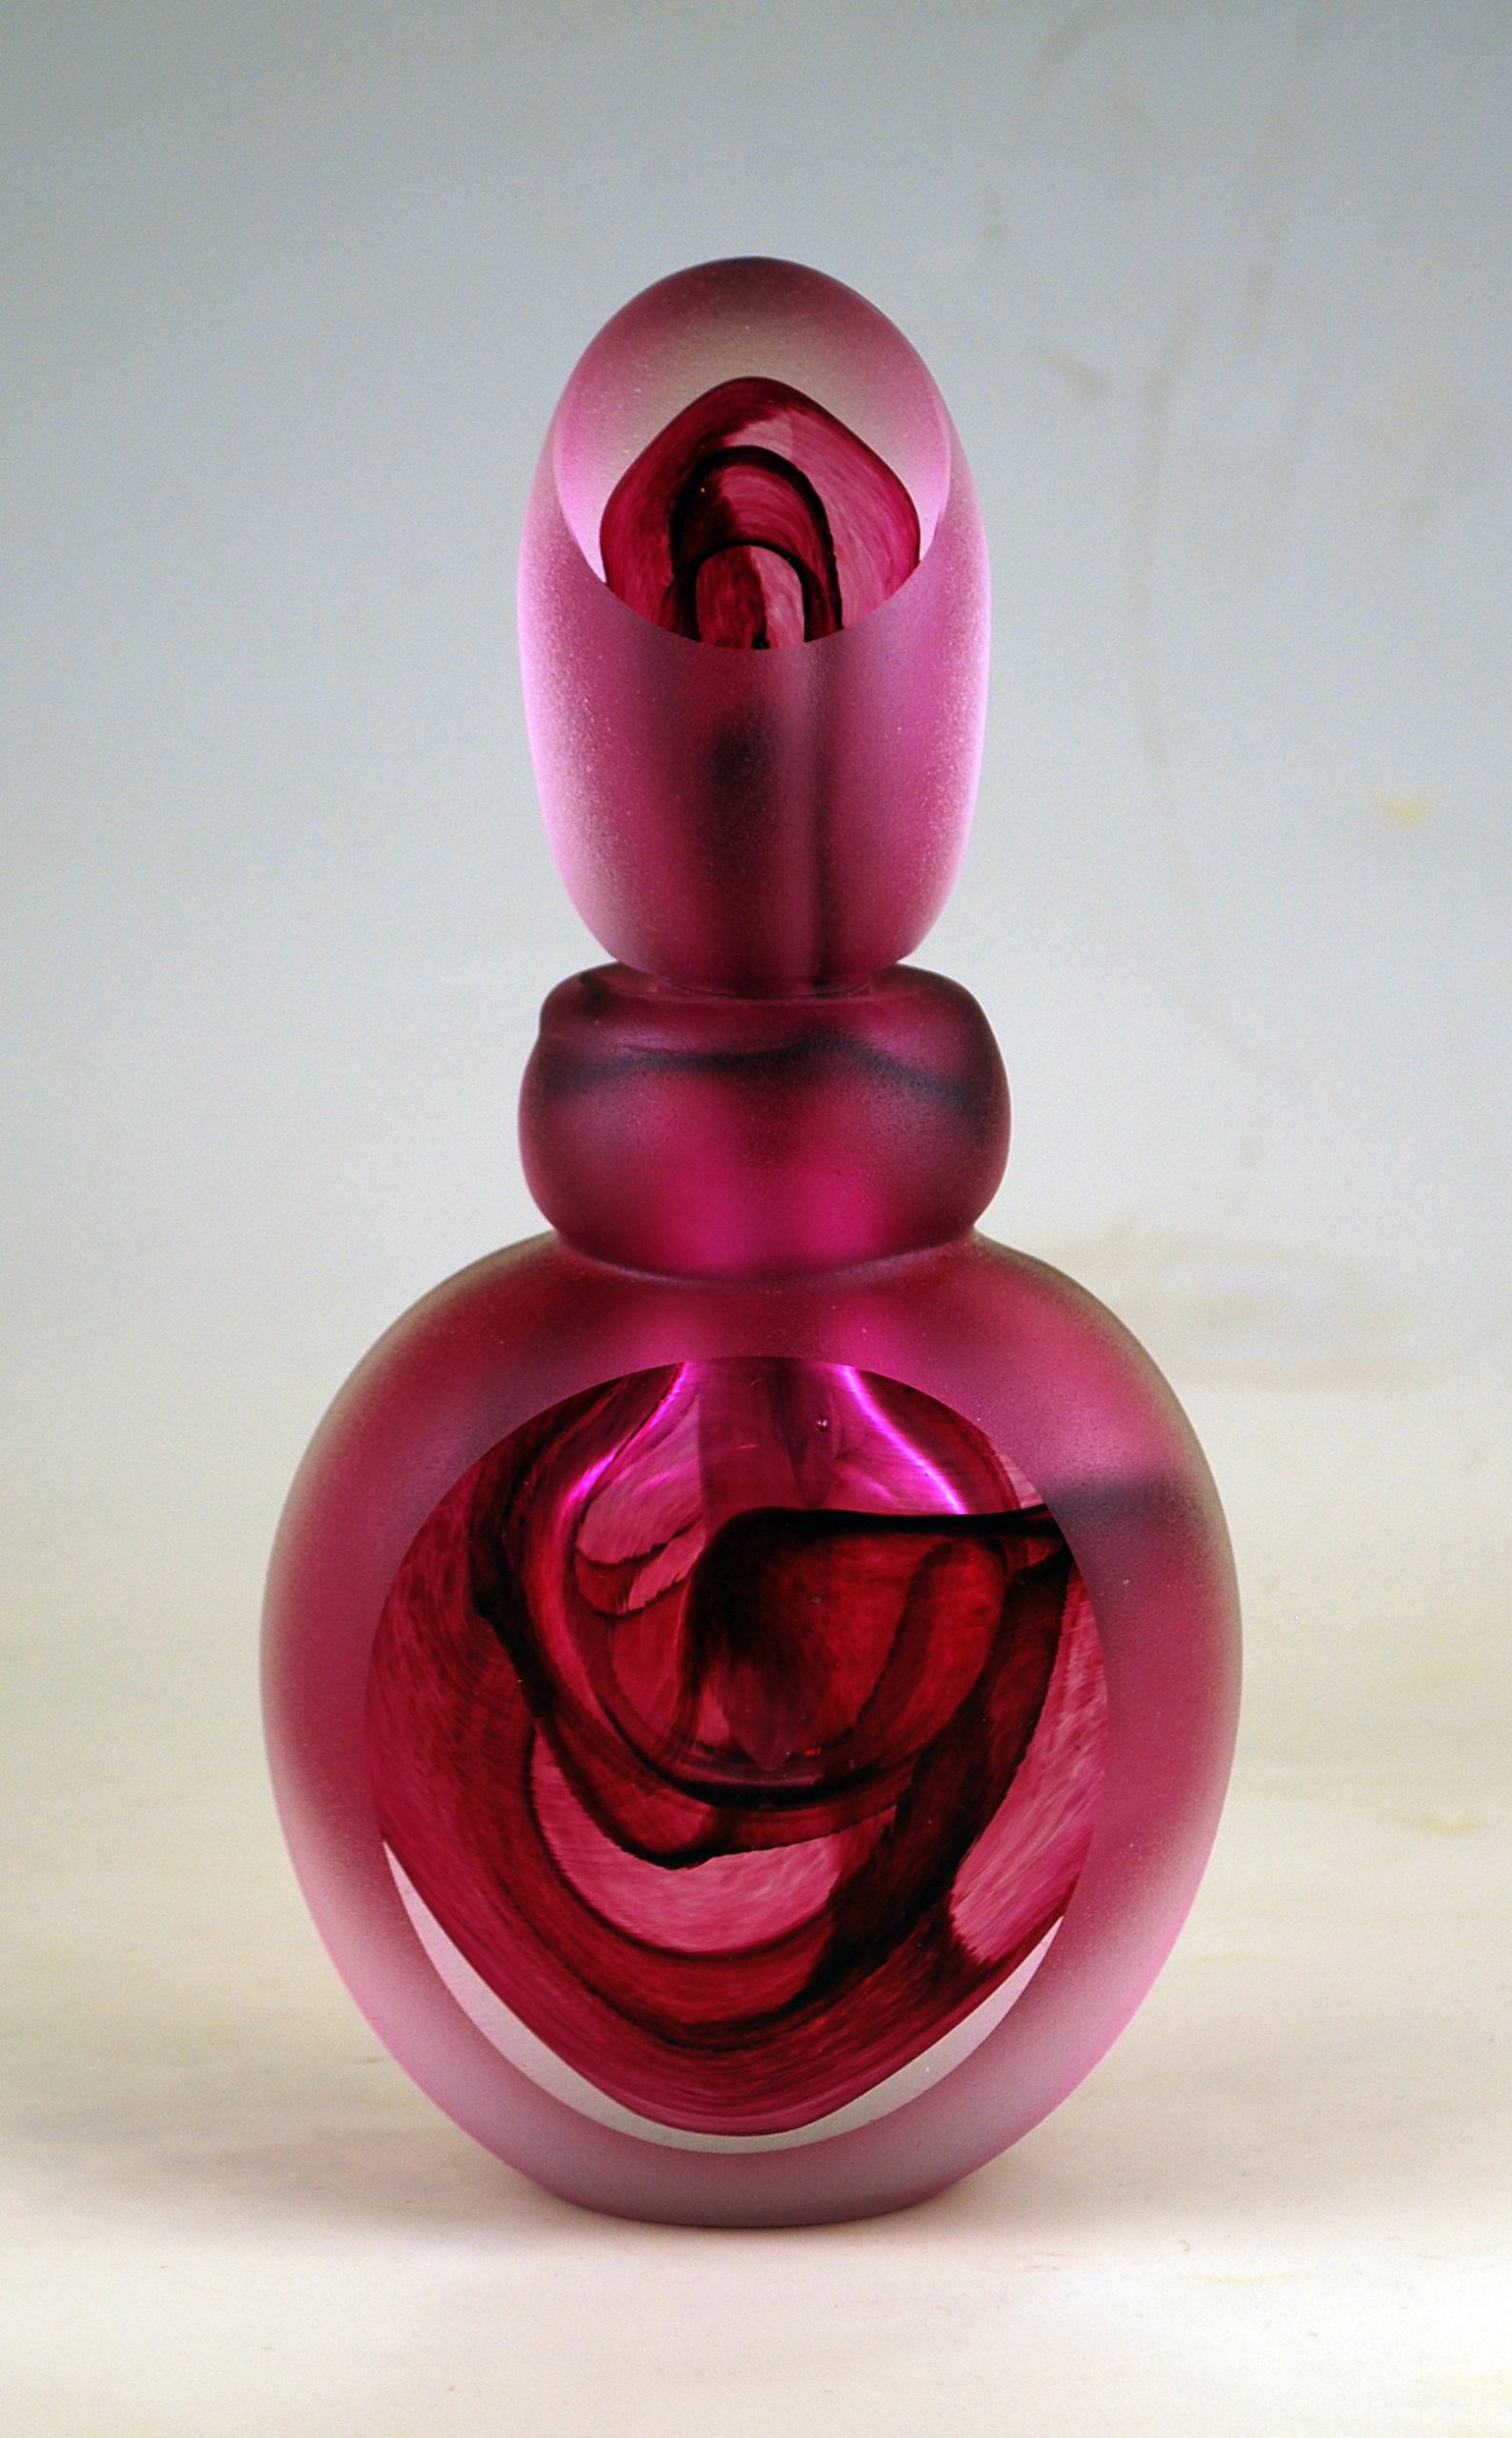 Andrew Shea, Rose Swirl Perfume Bottle, 2019, blown glass, 7.75x3.5x3.5 inches, collection of the artist